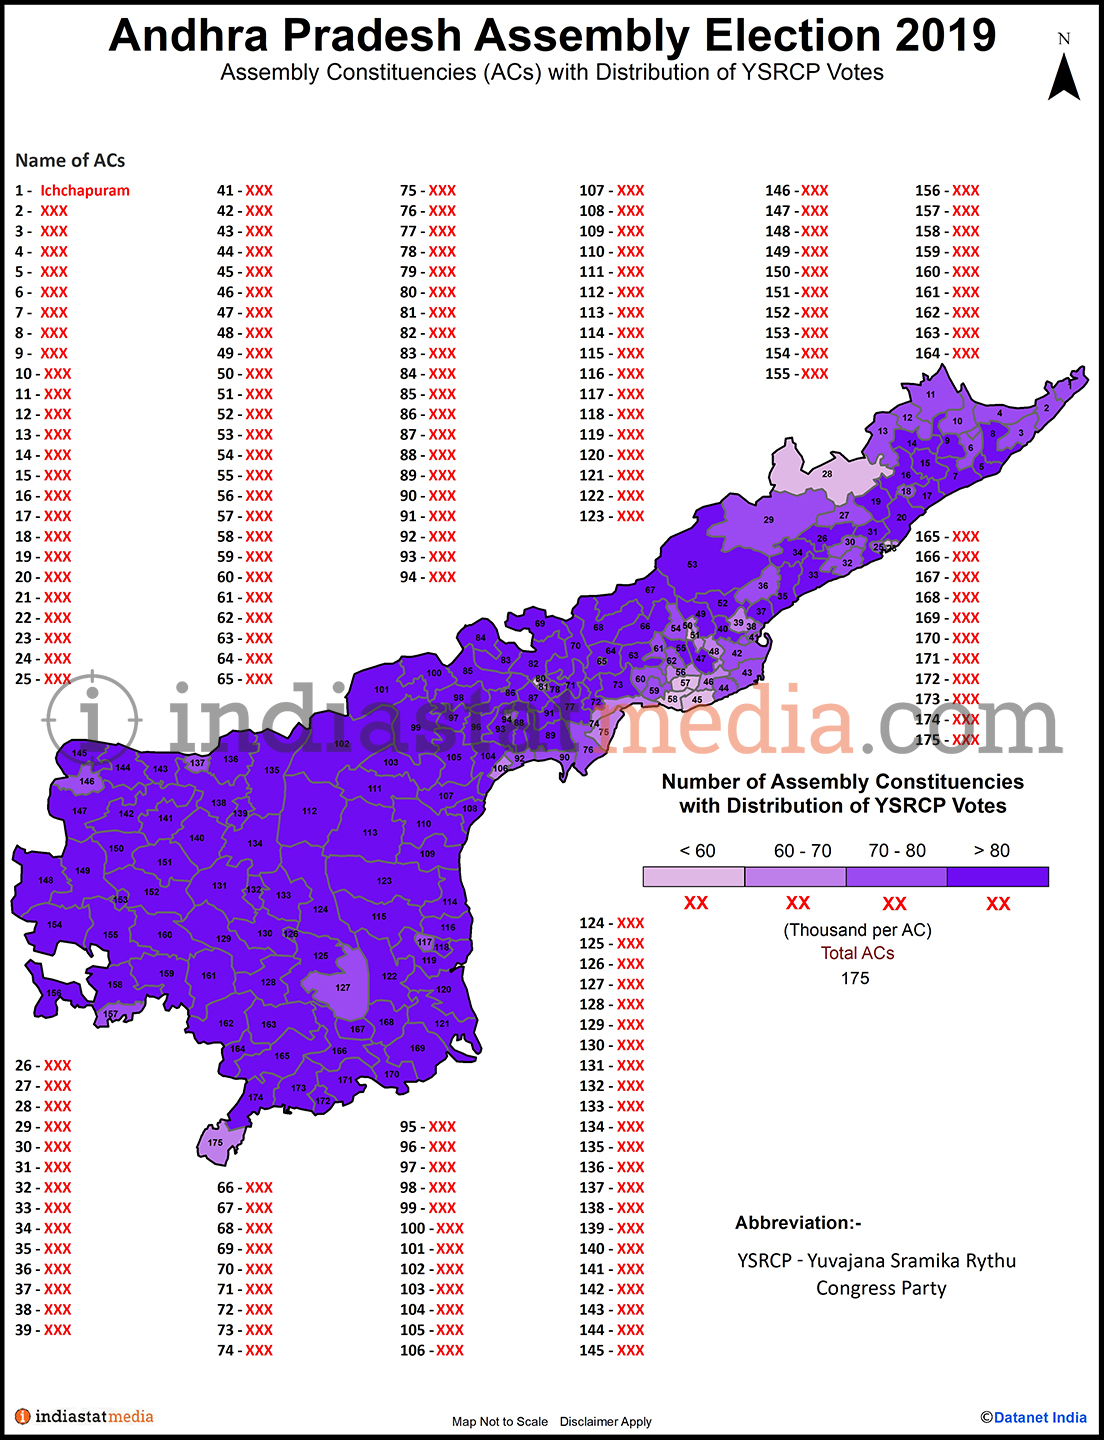 Distribution of YSRCP Votes by Constituencies in Andhra Pradesh (Assembly Election - 2019)